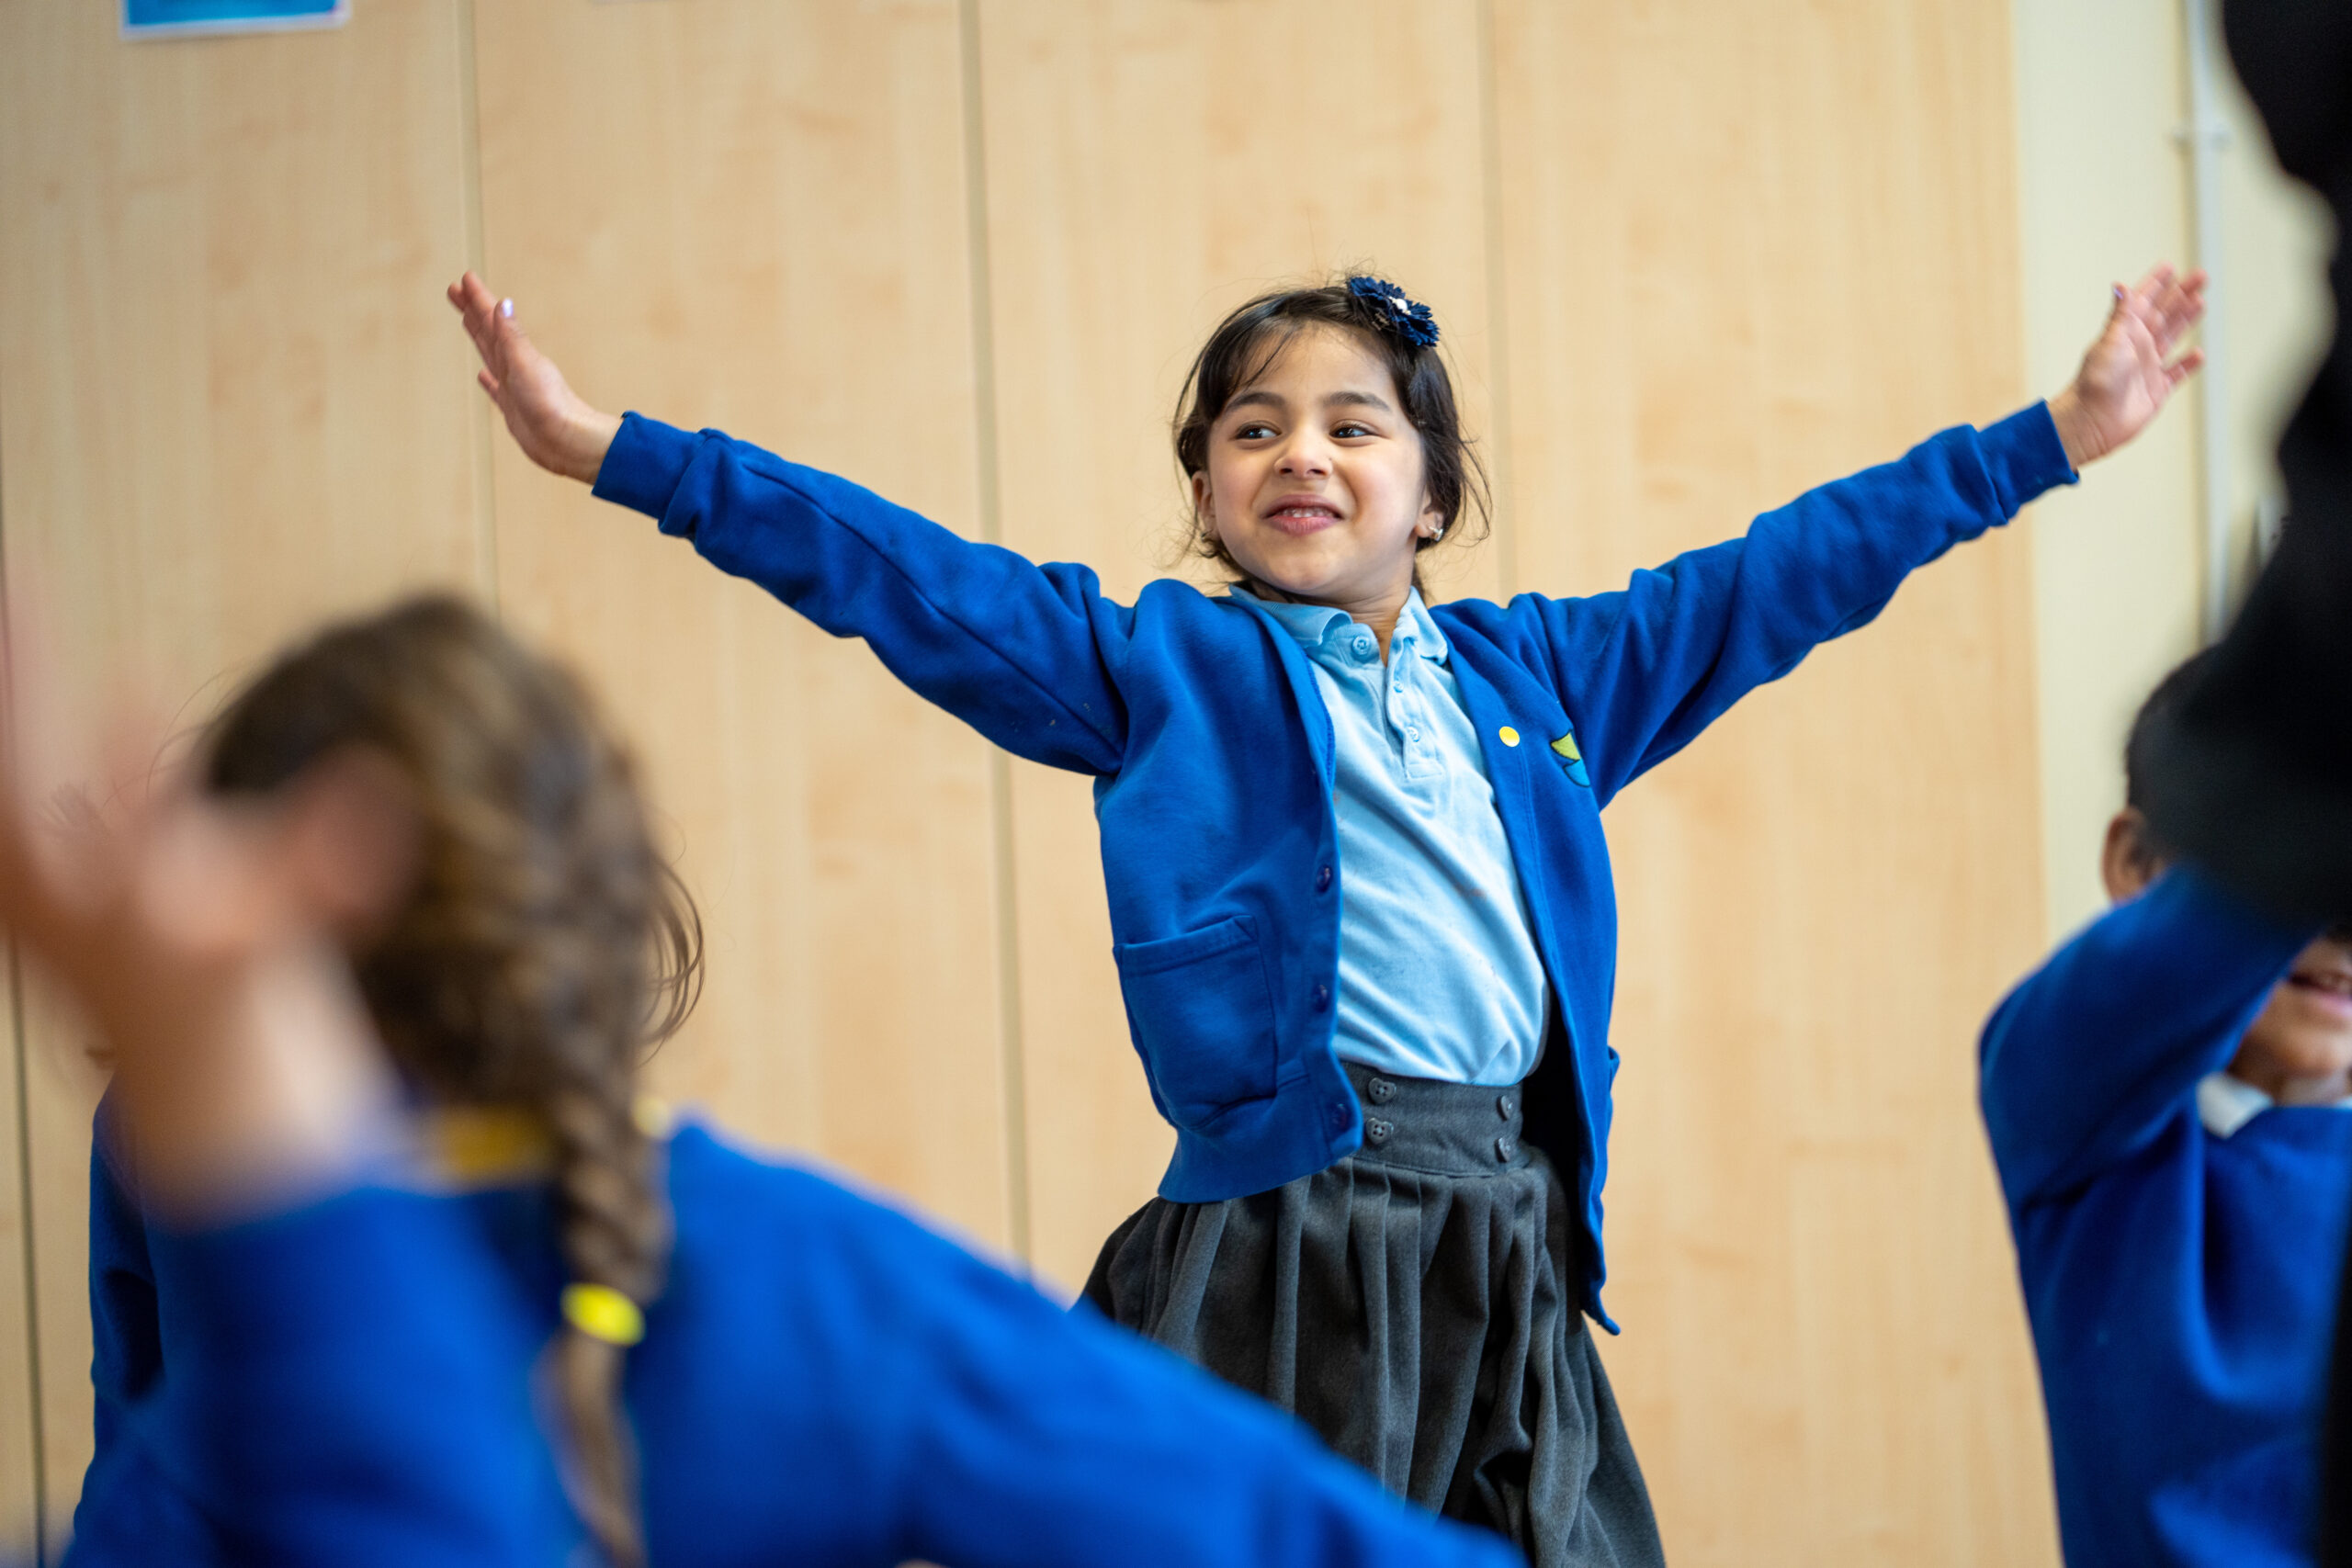 A young girl, wearing a blue cardigan and grey skirt, smiles with her arms stretched out in a classroom setting. She appears to be engaged in an interactive activity with other children.